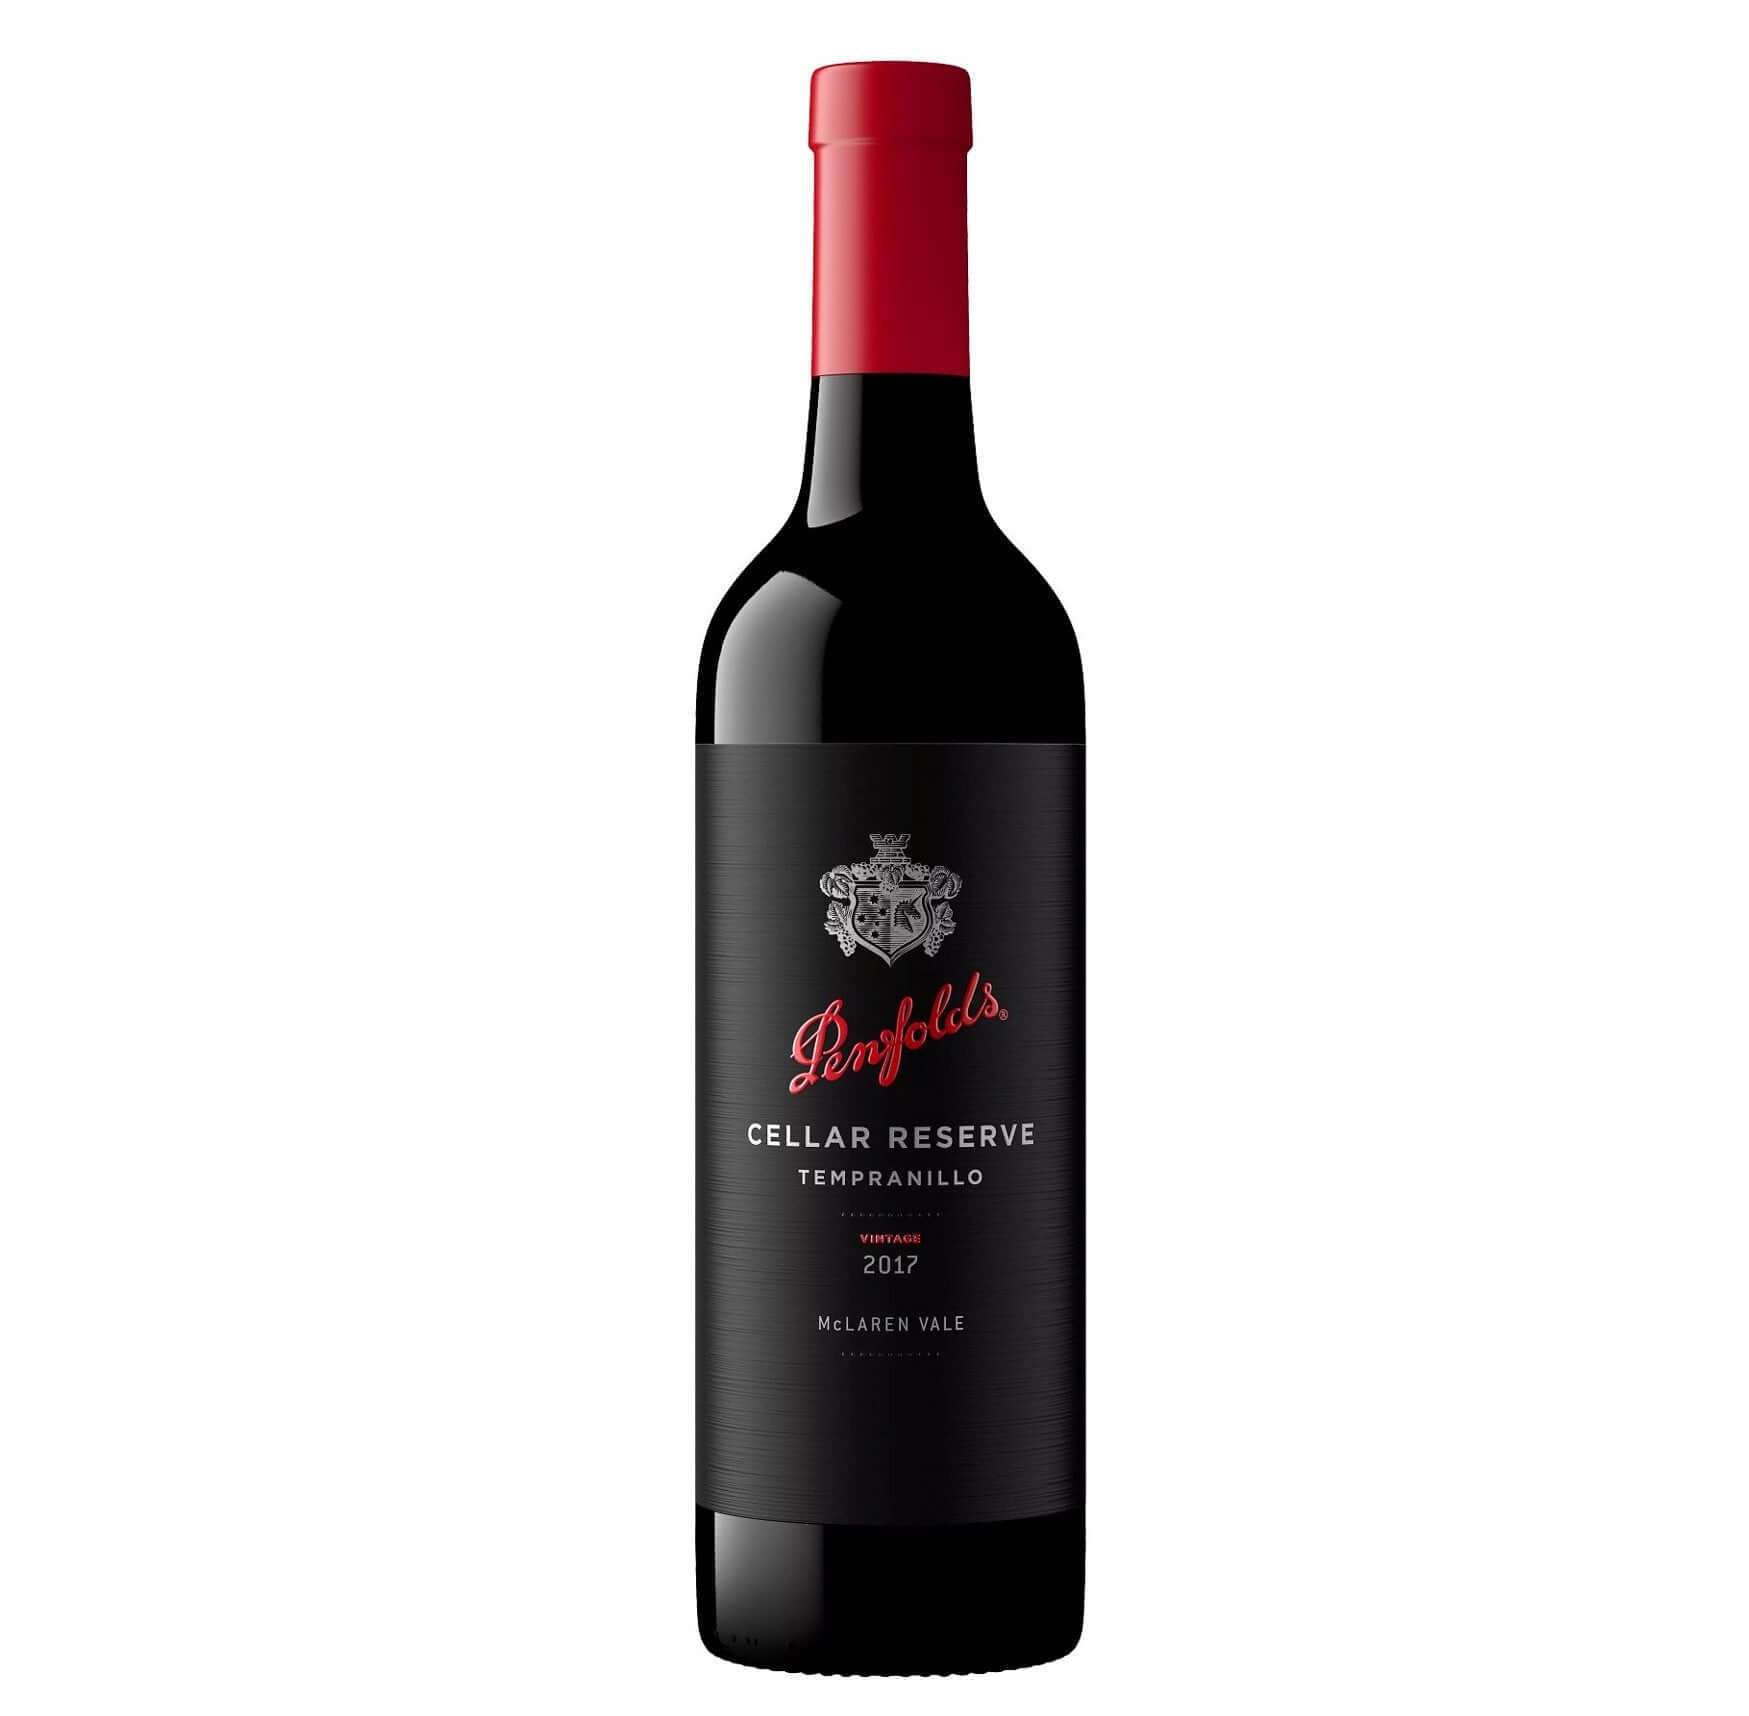 Penfolds Cellar Reserve Tempranillo Mclaren Vale 2017 - Curated Wines